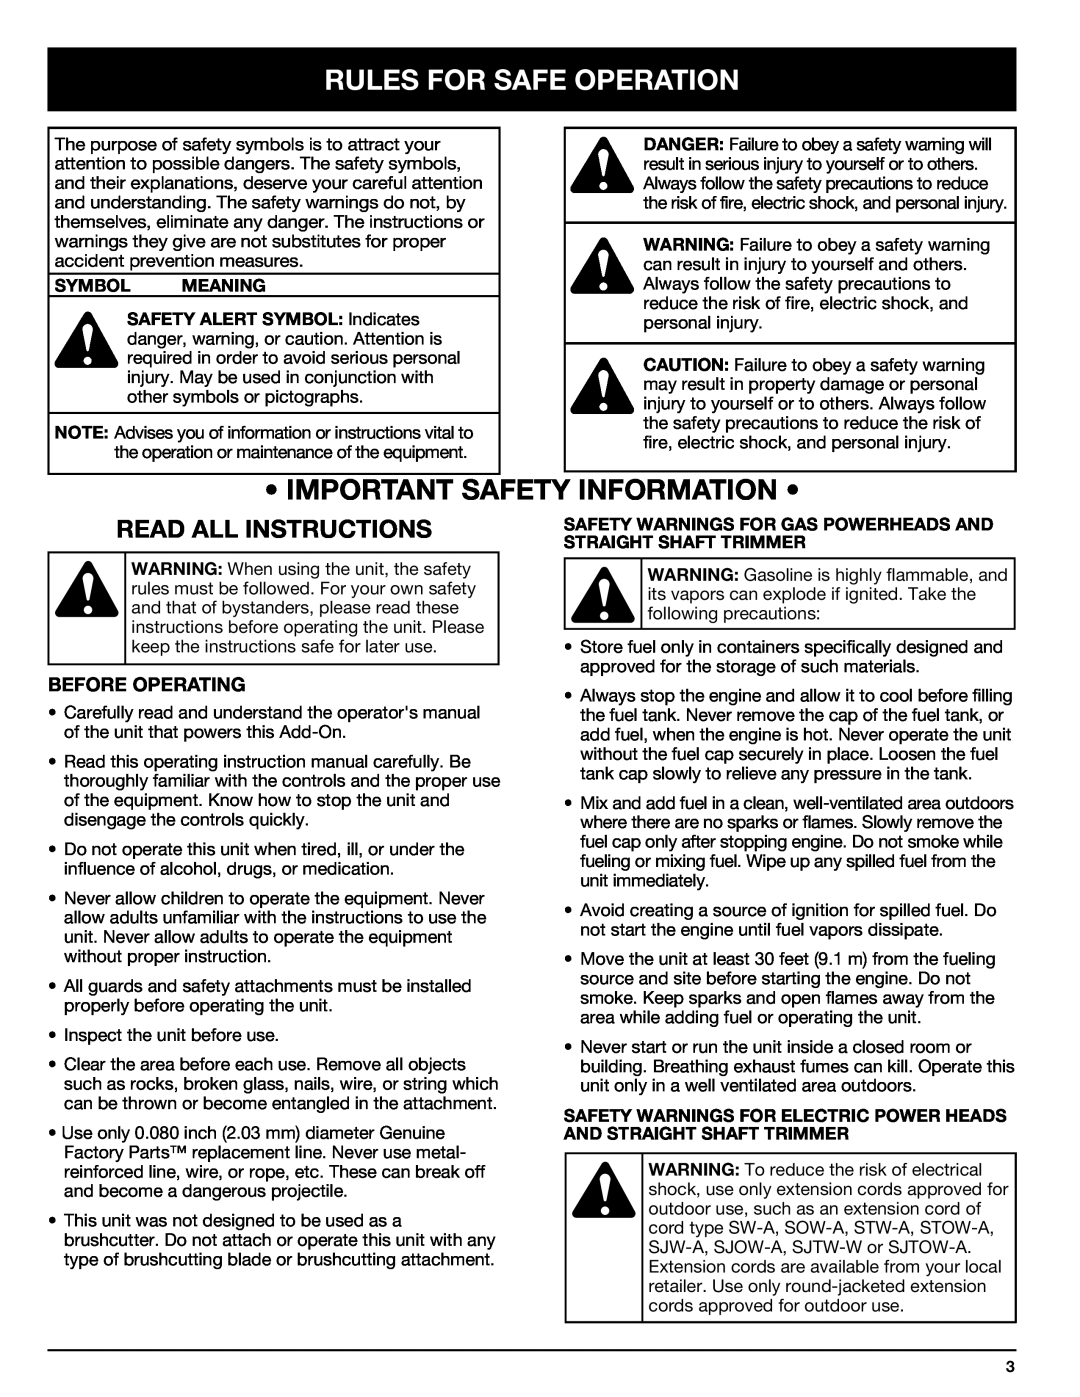 Troy-Bilt 769-00425A manual Rules For Safe Operation, Important Safety Information, Read All Instructions, Before Operating 